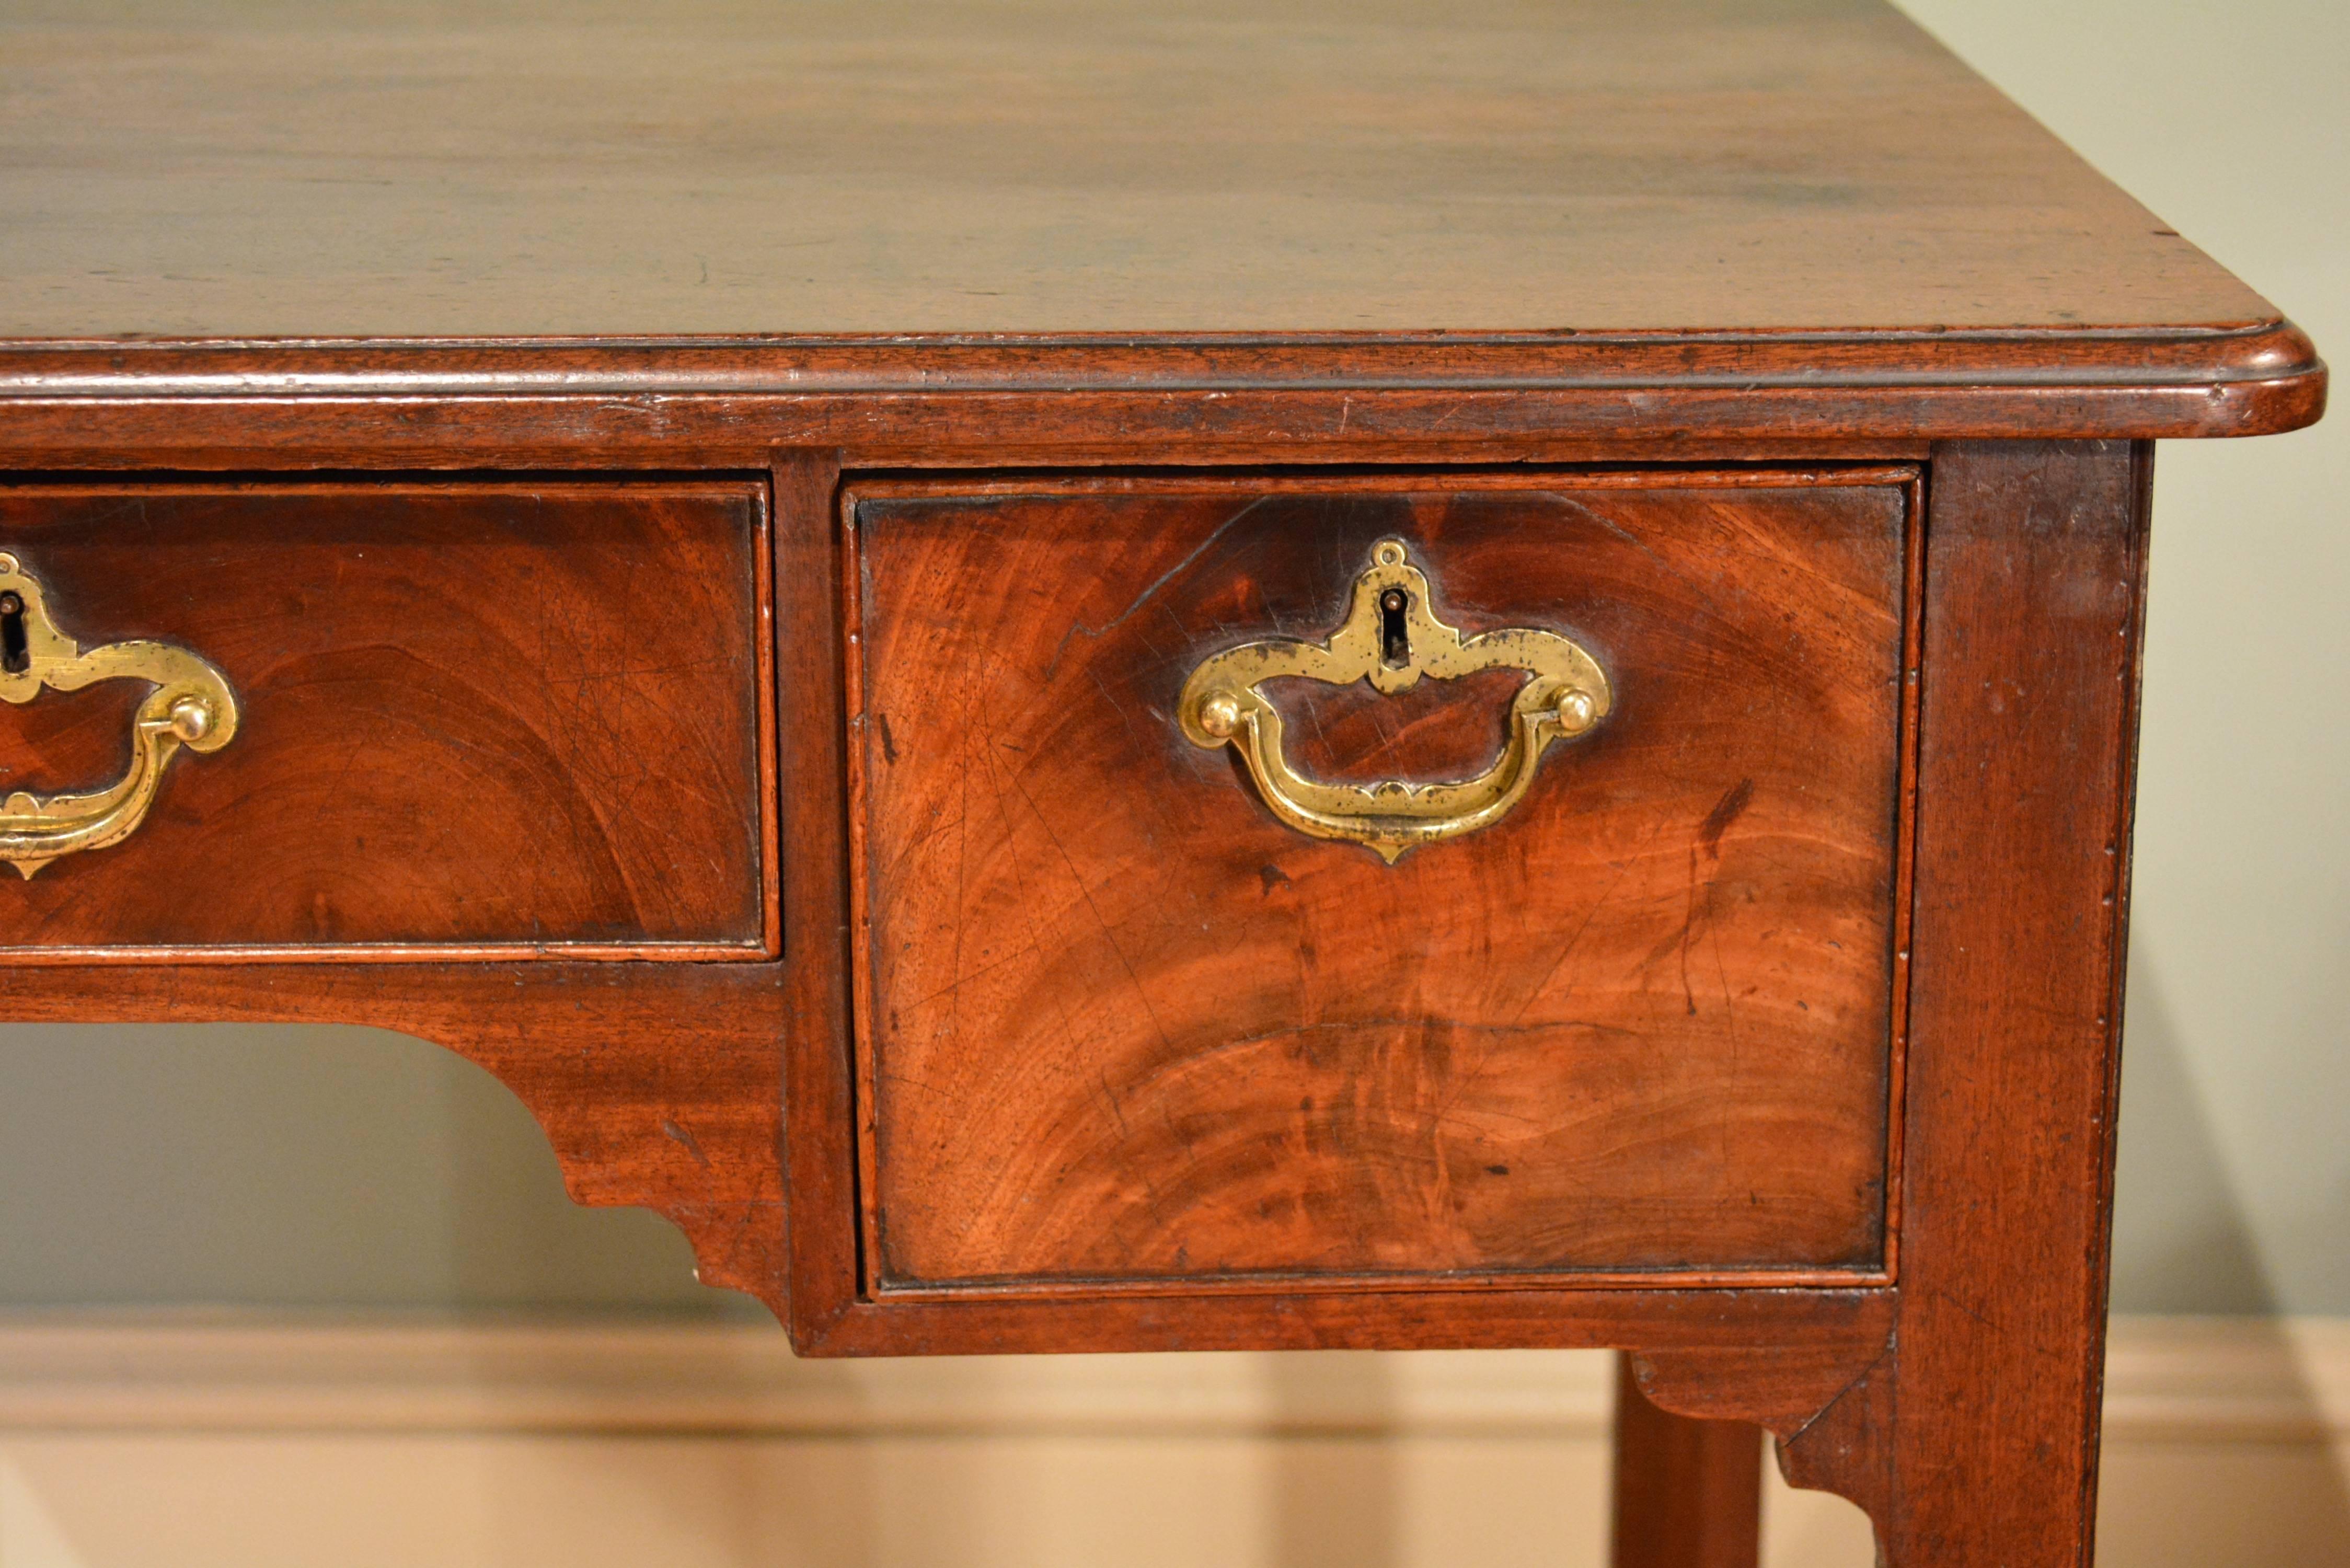 A George III mahogany centre table, the moulded top with rounded corners above three finely figured drawers to one side, retaining their original handles, the whole standing on square legs with shaped brackets.